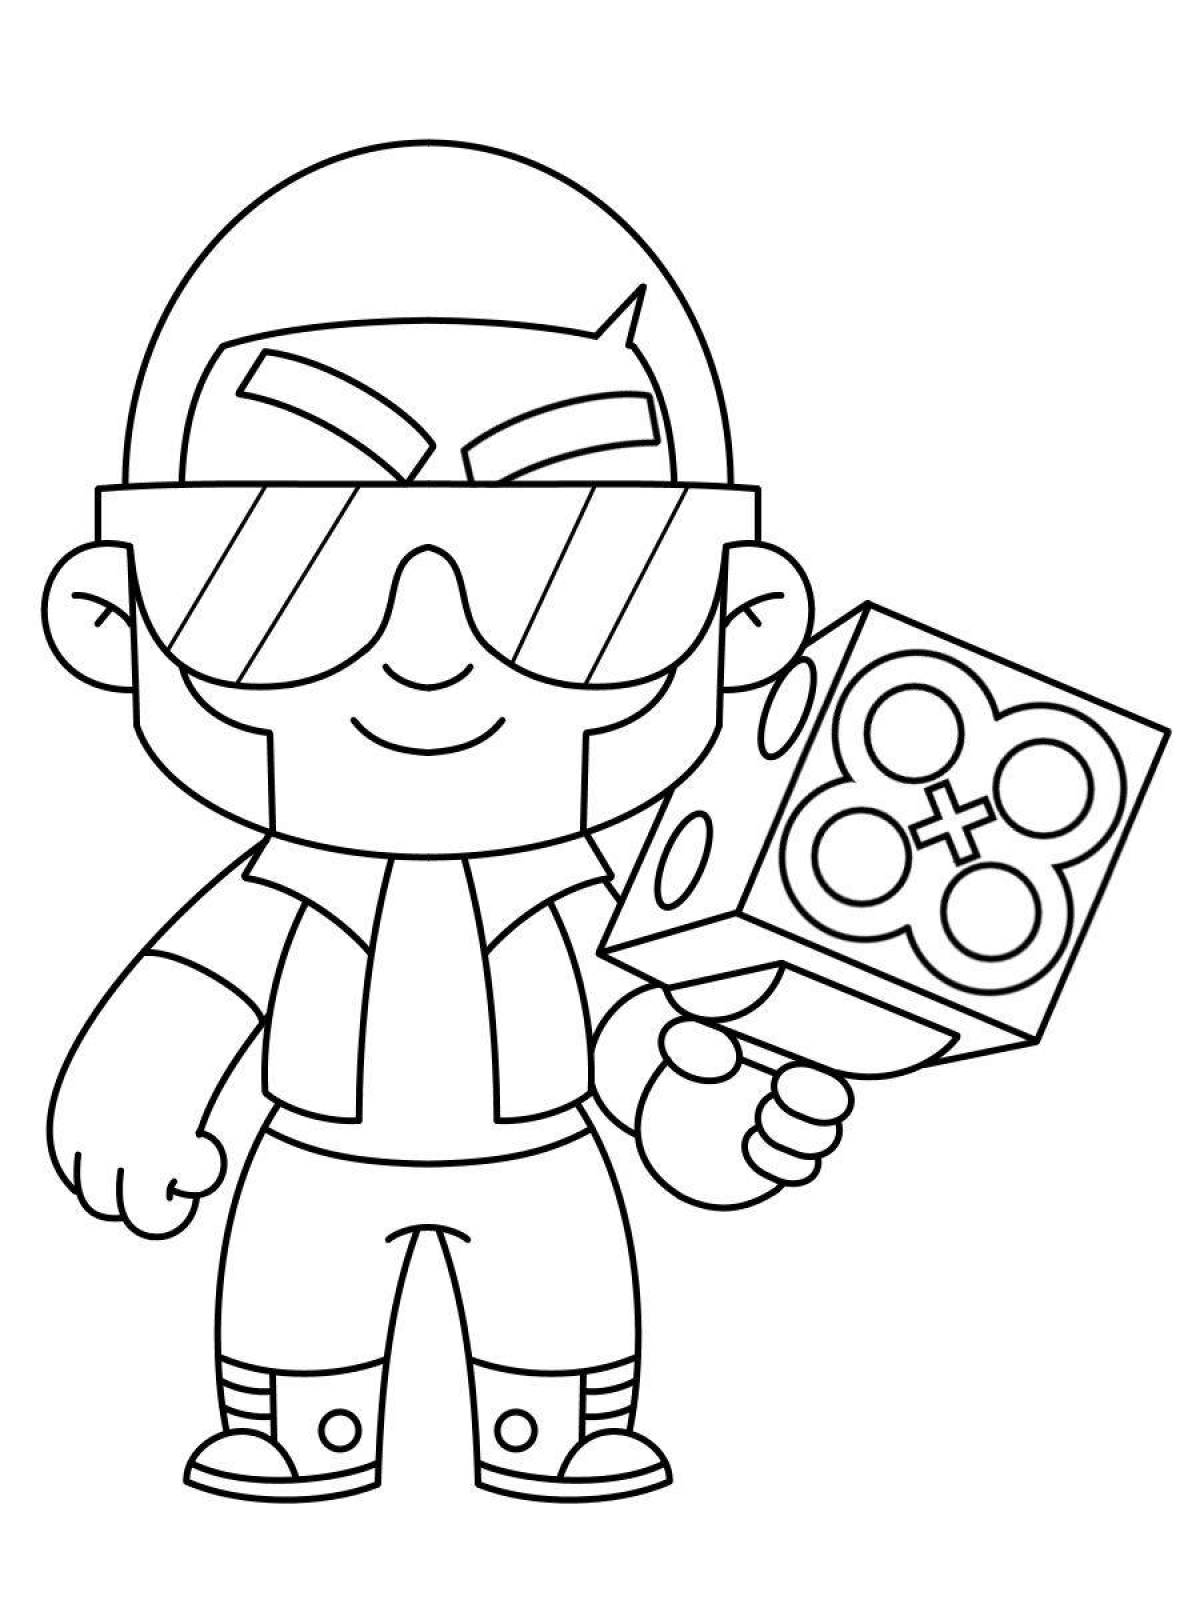 Amazing brawlstars coloring pages